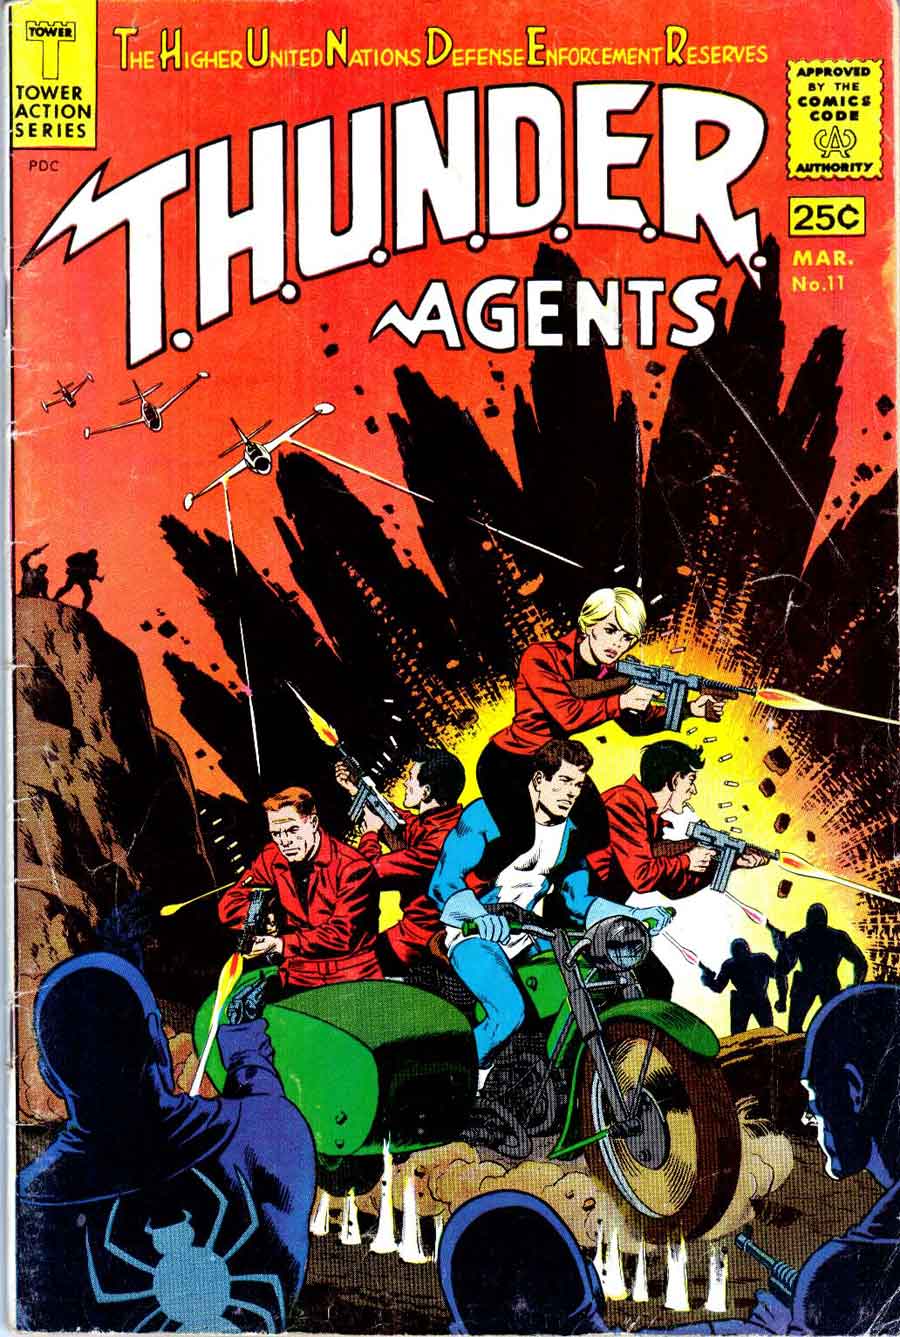 Thunder Agents v1 #11 tower silver age 1960s comic book cover art by Wally Wood